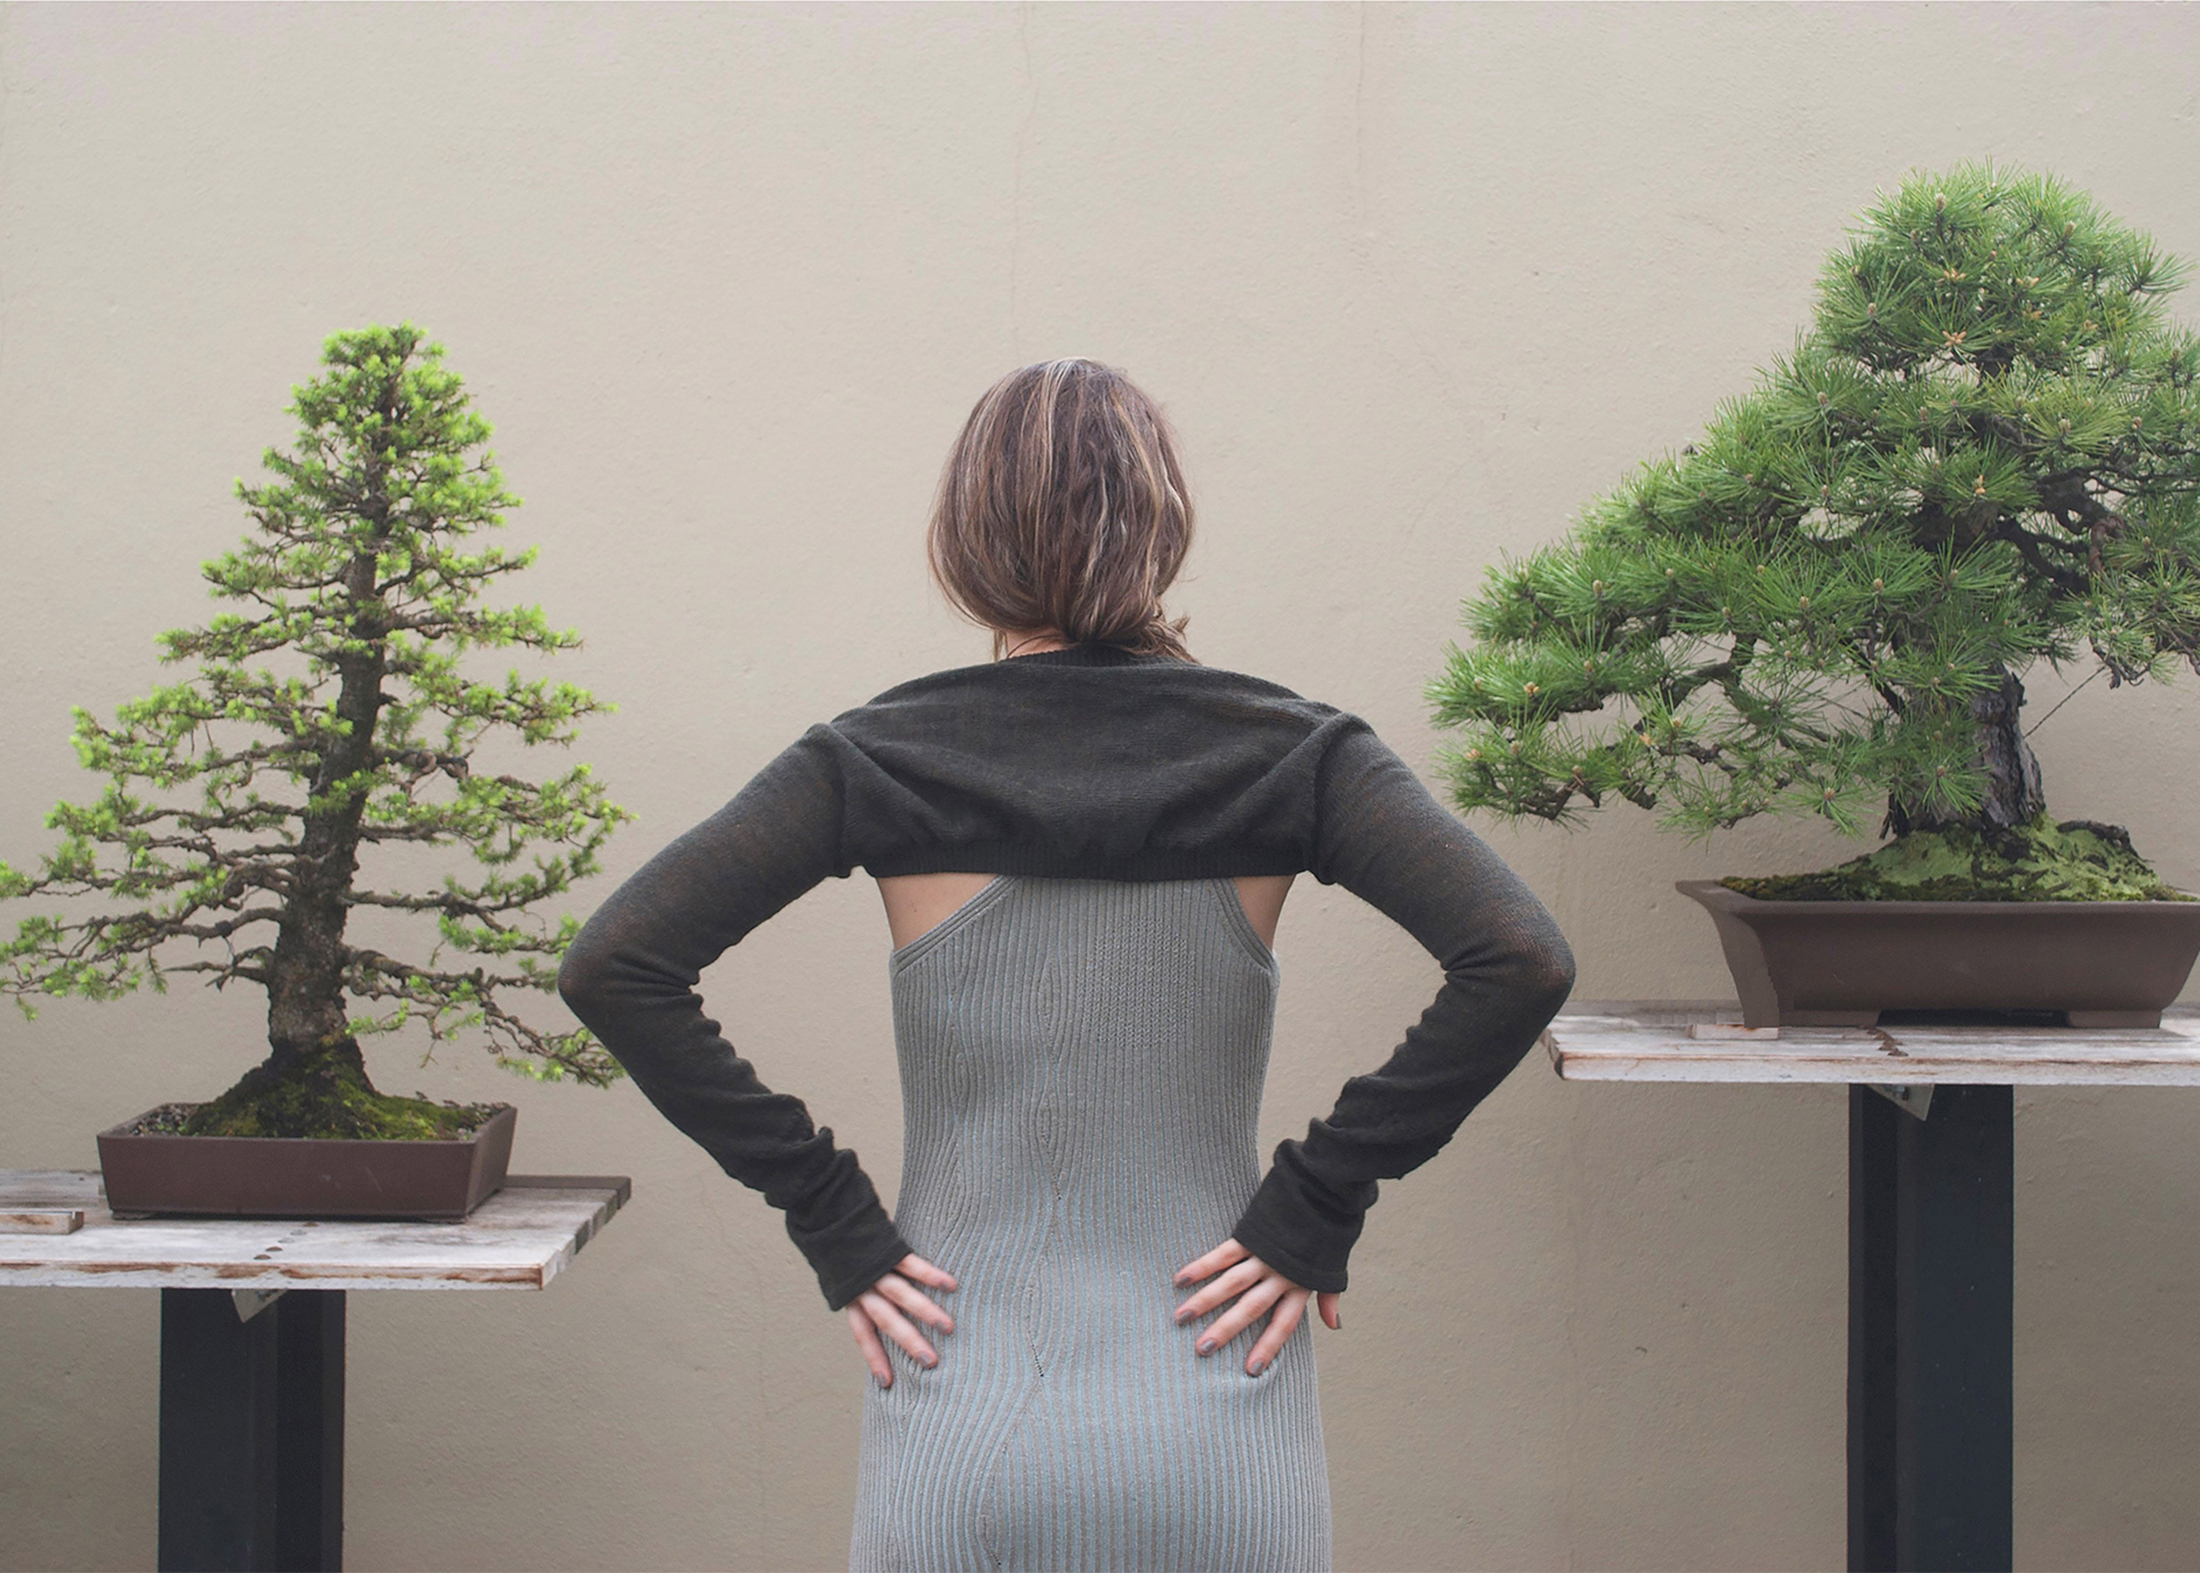 Back view of the look, showing the shrug knitted in one piece.